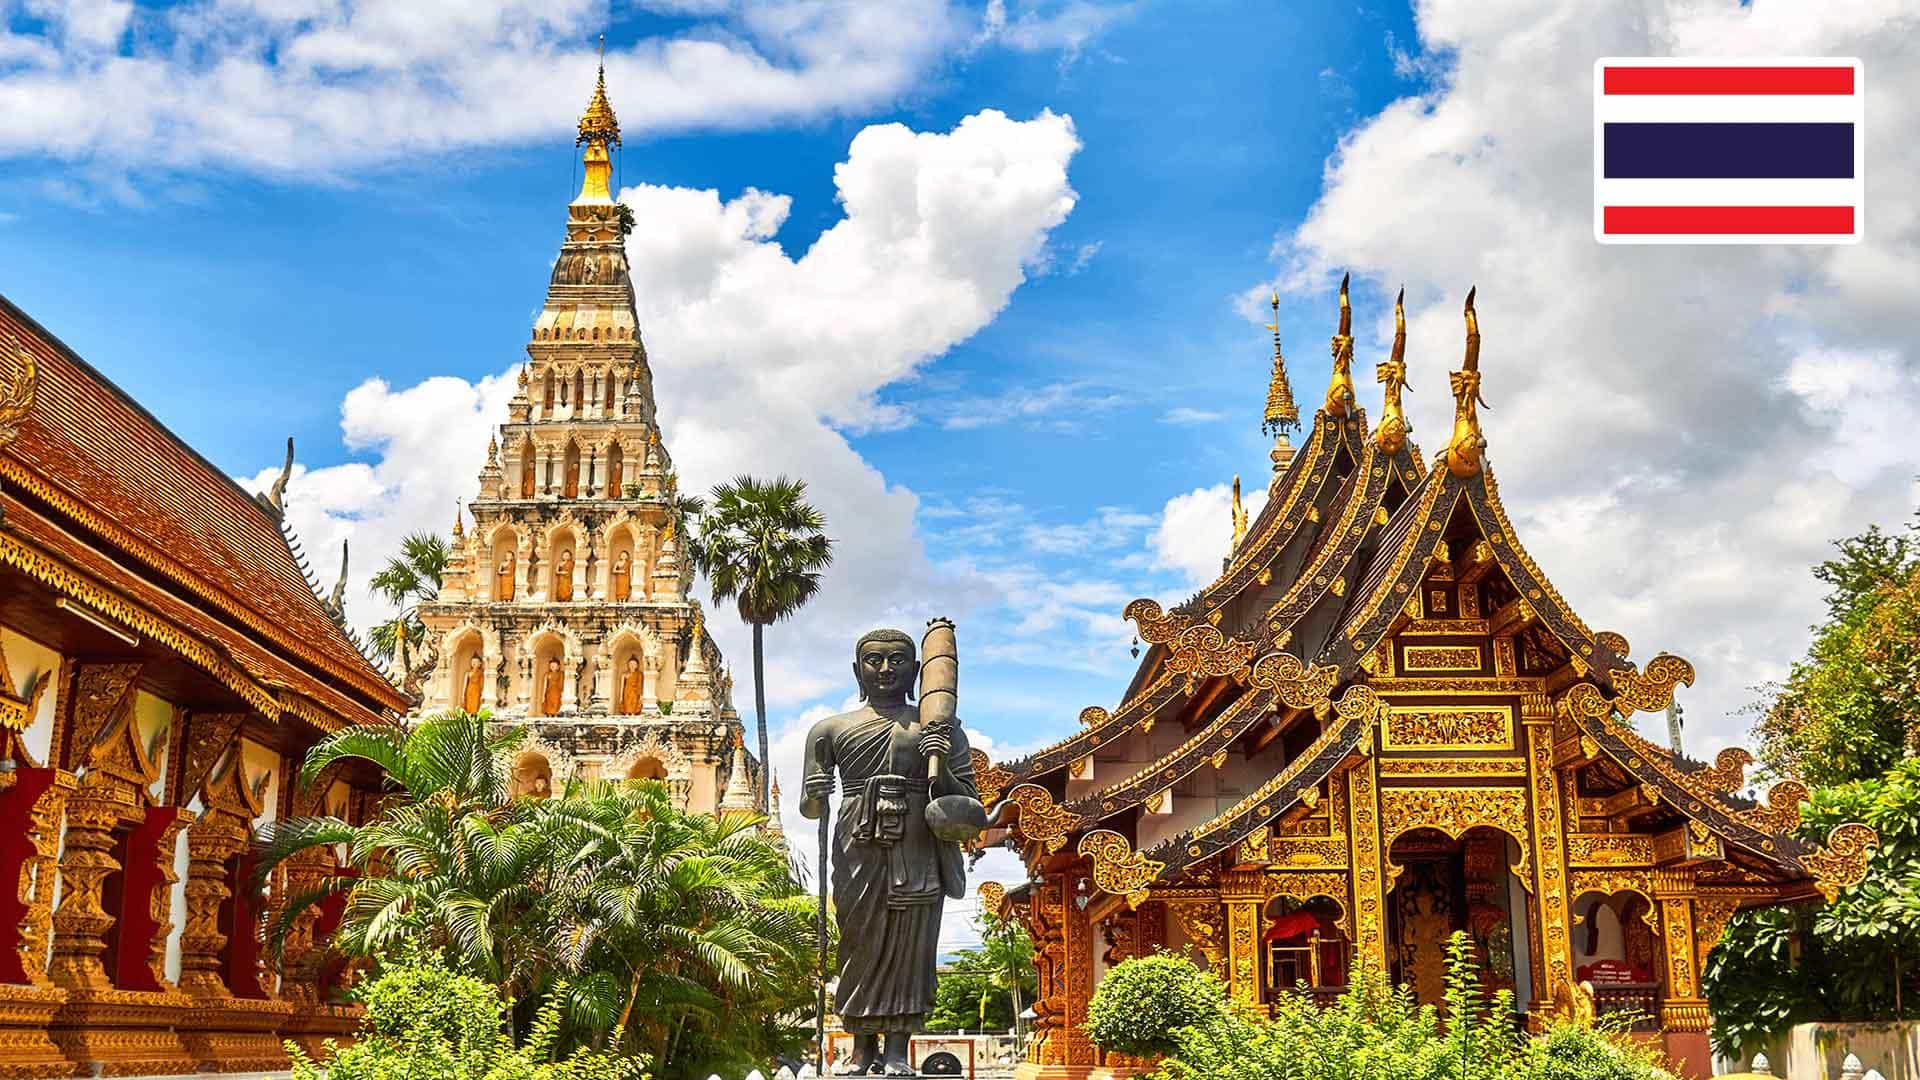 Apply Thailand visa online from India Price starts from Rs.3300